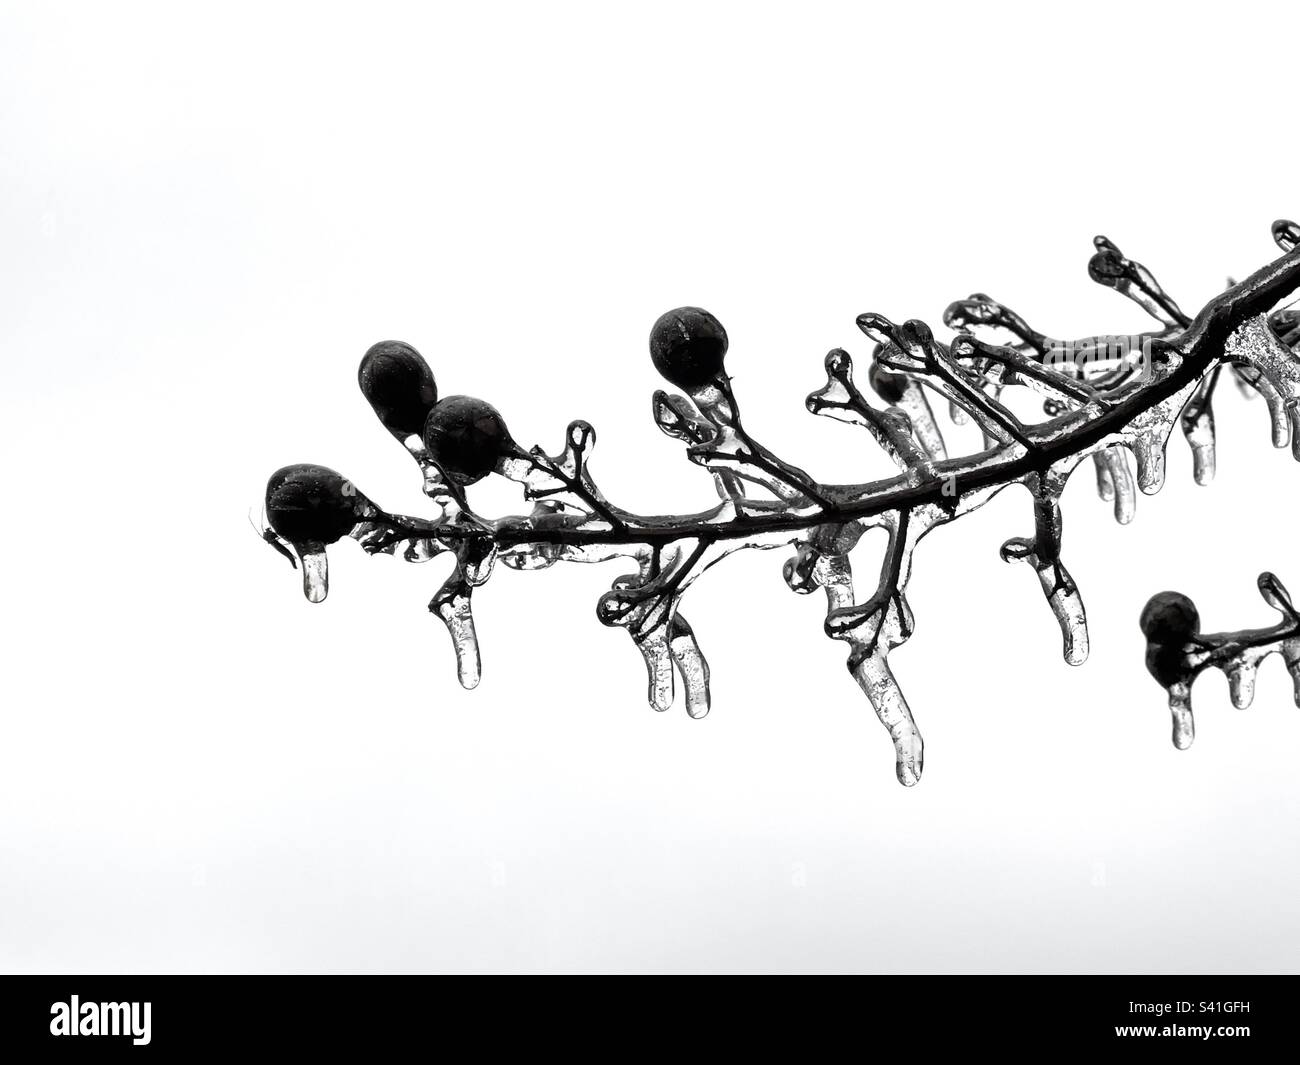 Branch of a tree with berries covered in thick ice after extreme winter weather. No people. Stock Photo